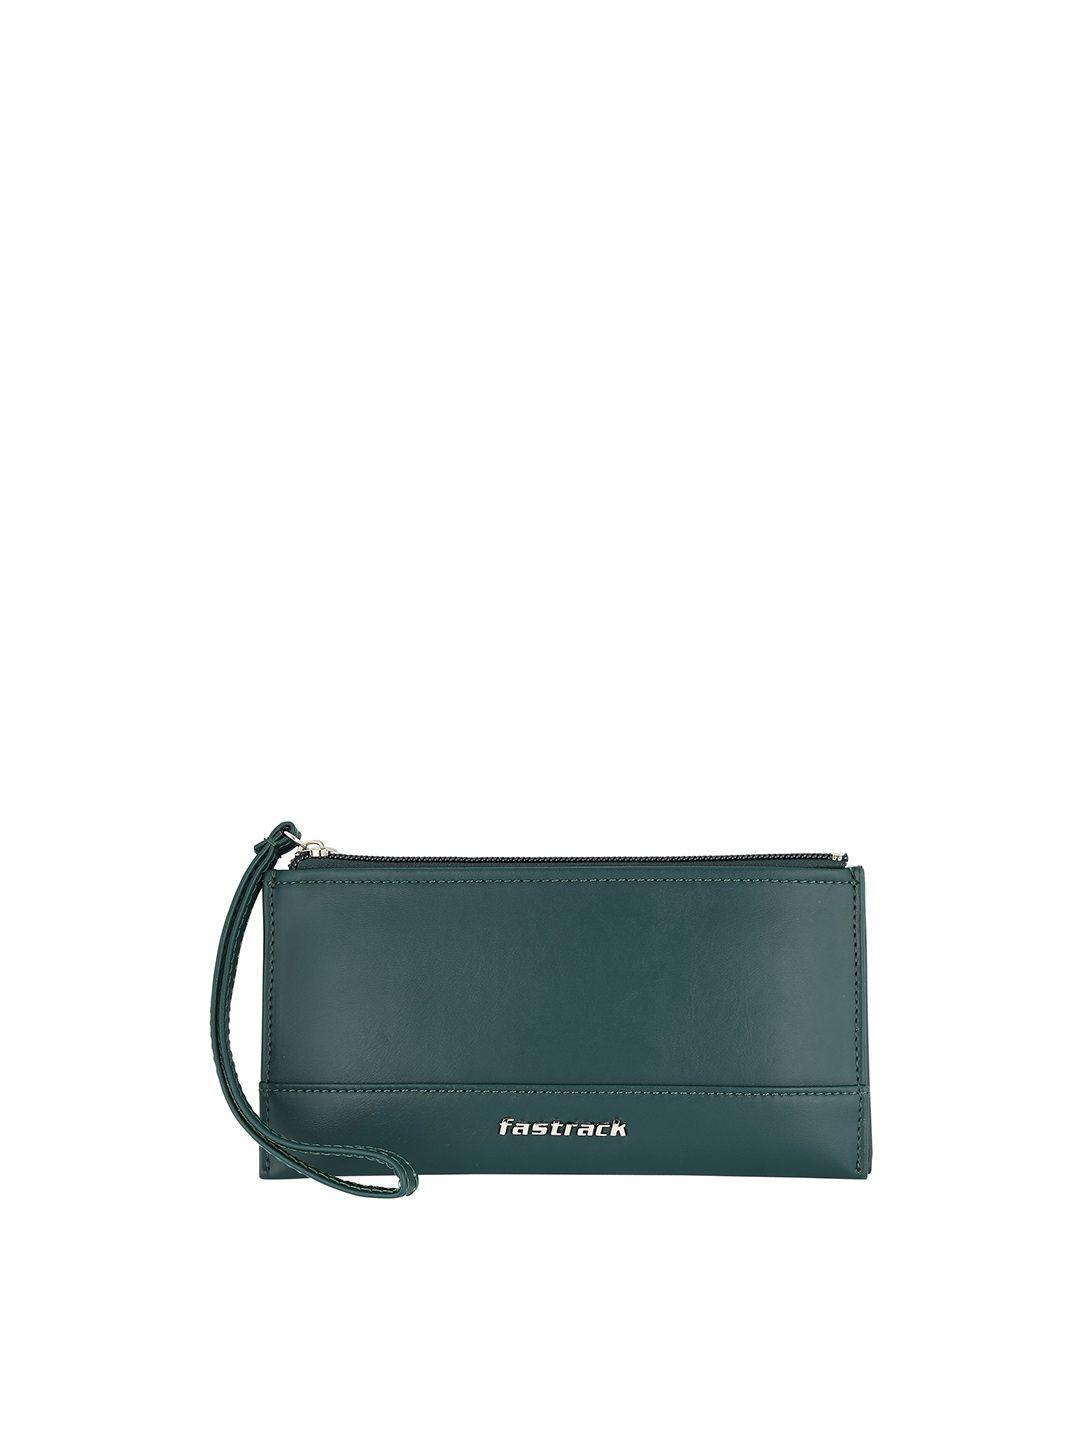 fastrack panelled purse clutch